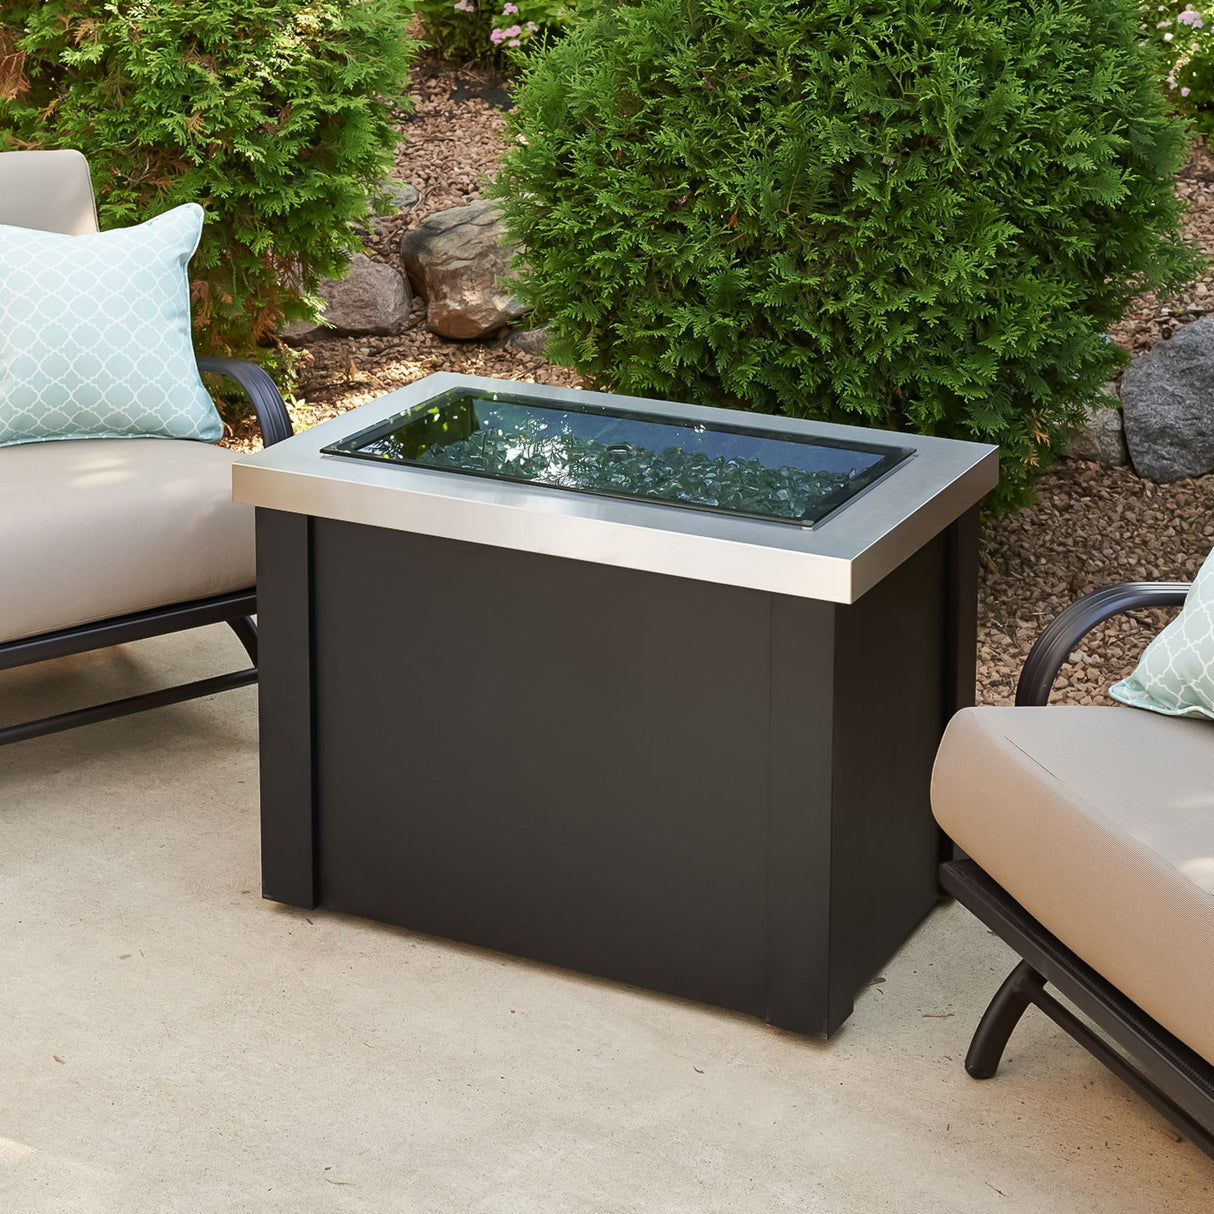 A cover placed on top of the Providence Rectangular Gas Fire Pit Table allowing it to be used as and outdoor table